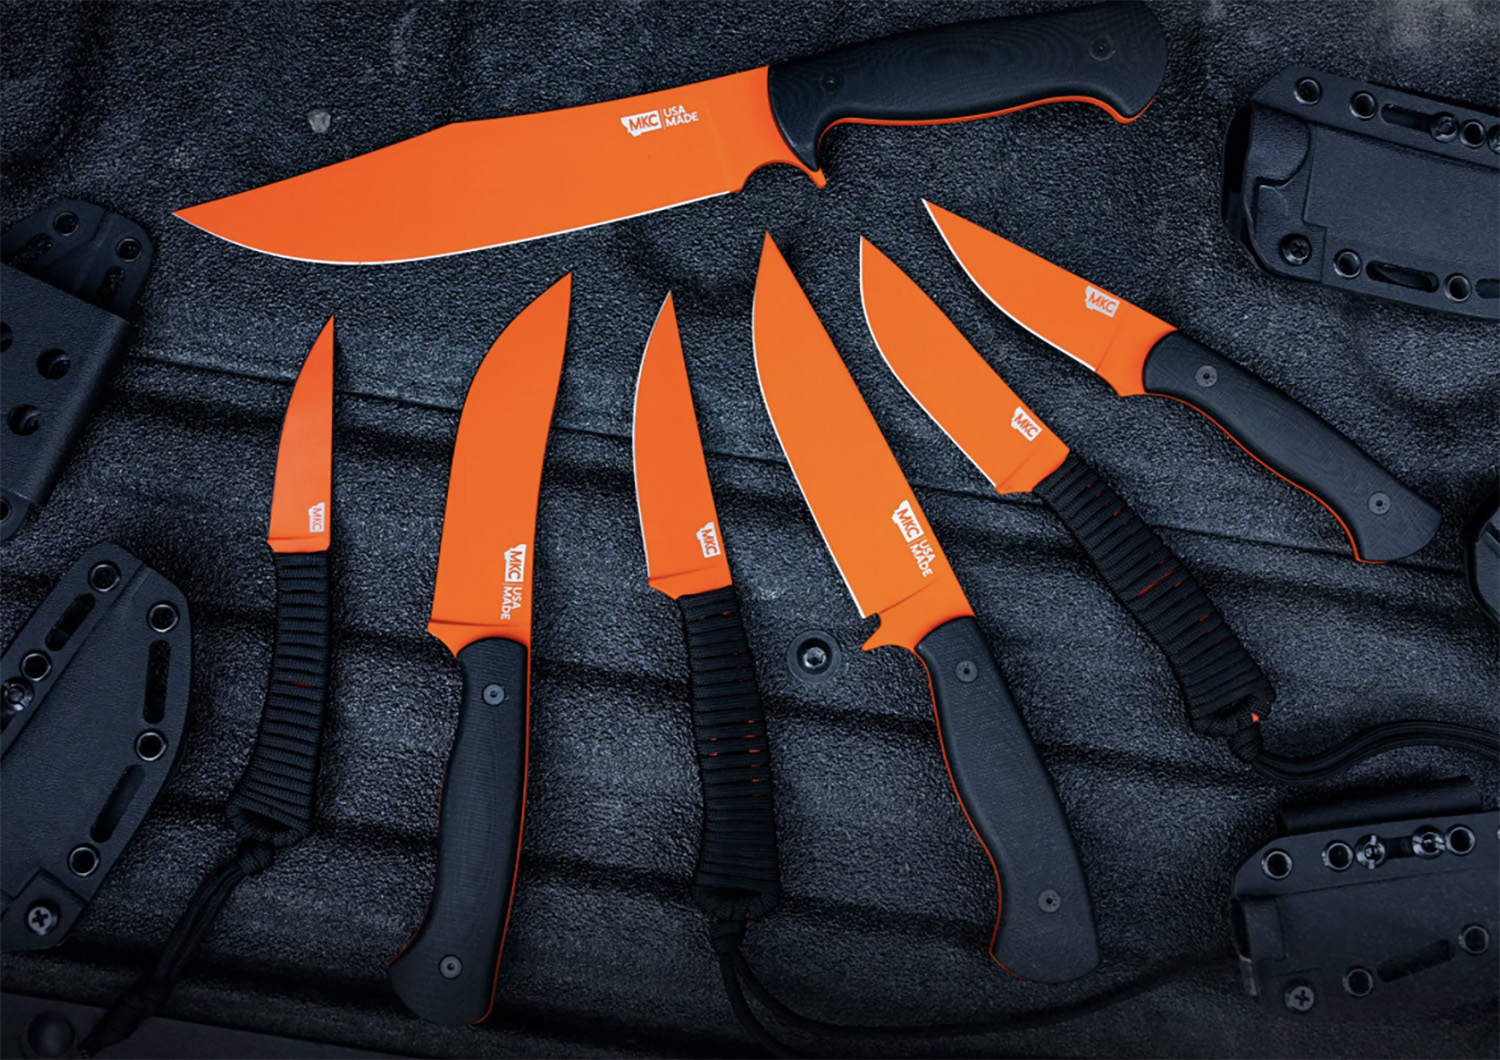 Montana Knife Company’s ‘Blaze Friday’ Is Your Chance to Score Hard-to-Get Hunting Knives